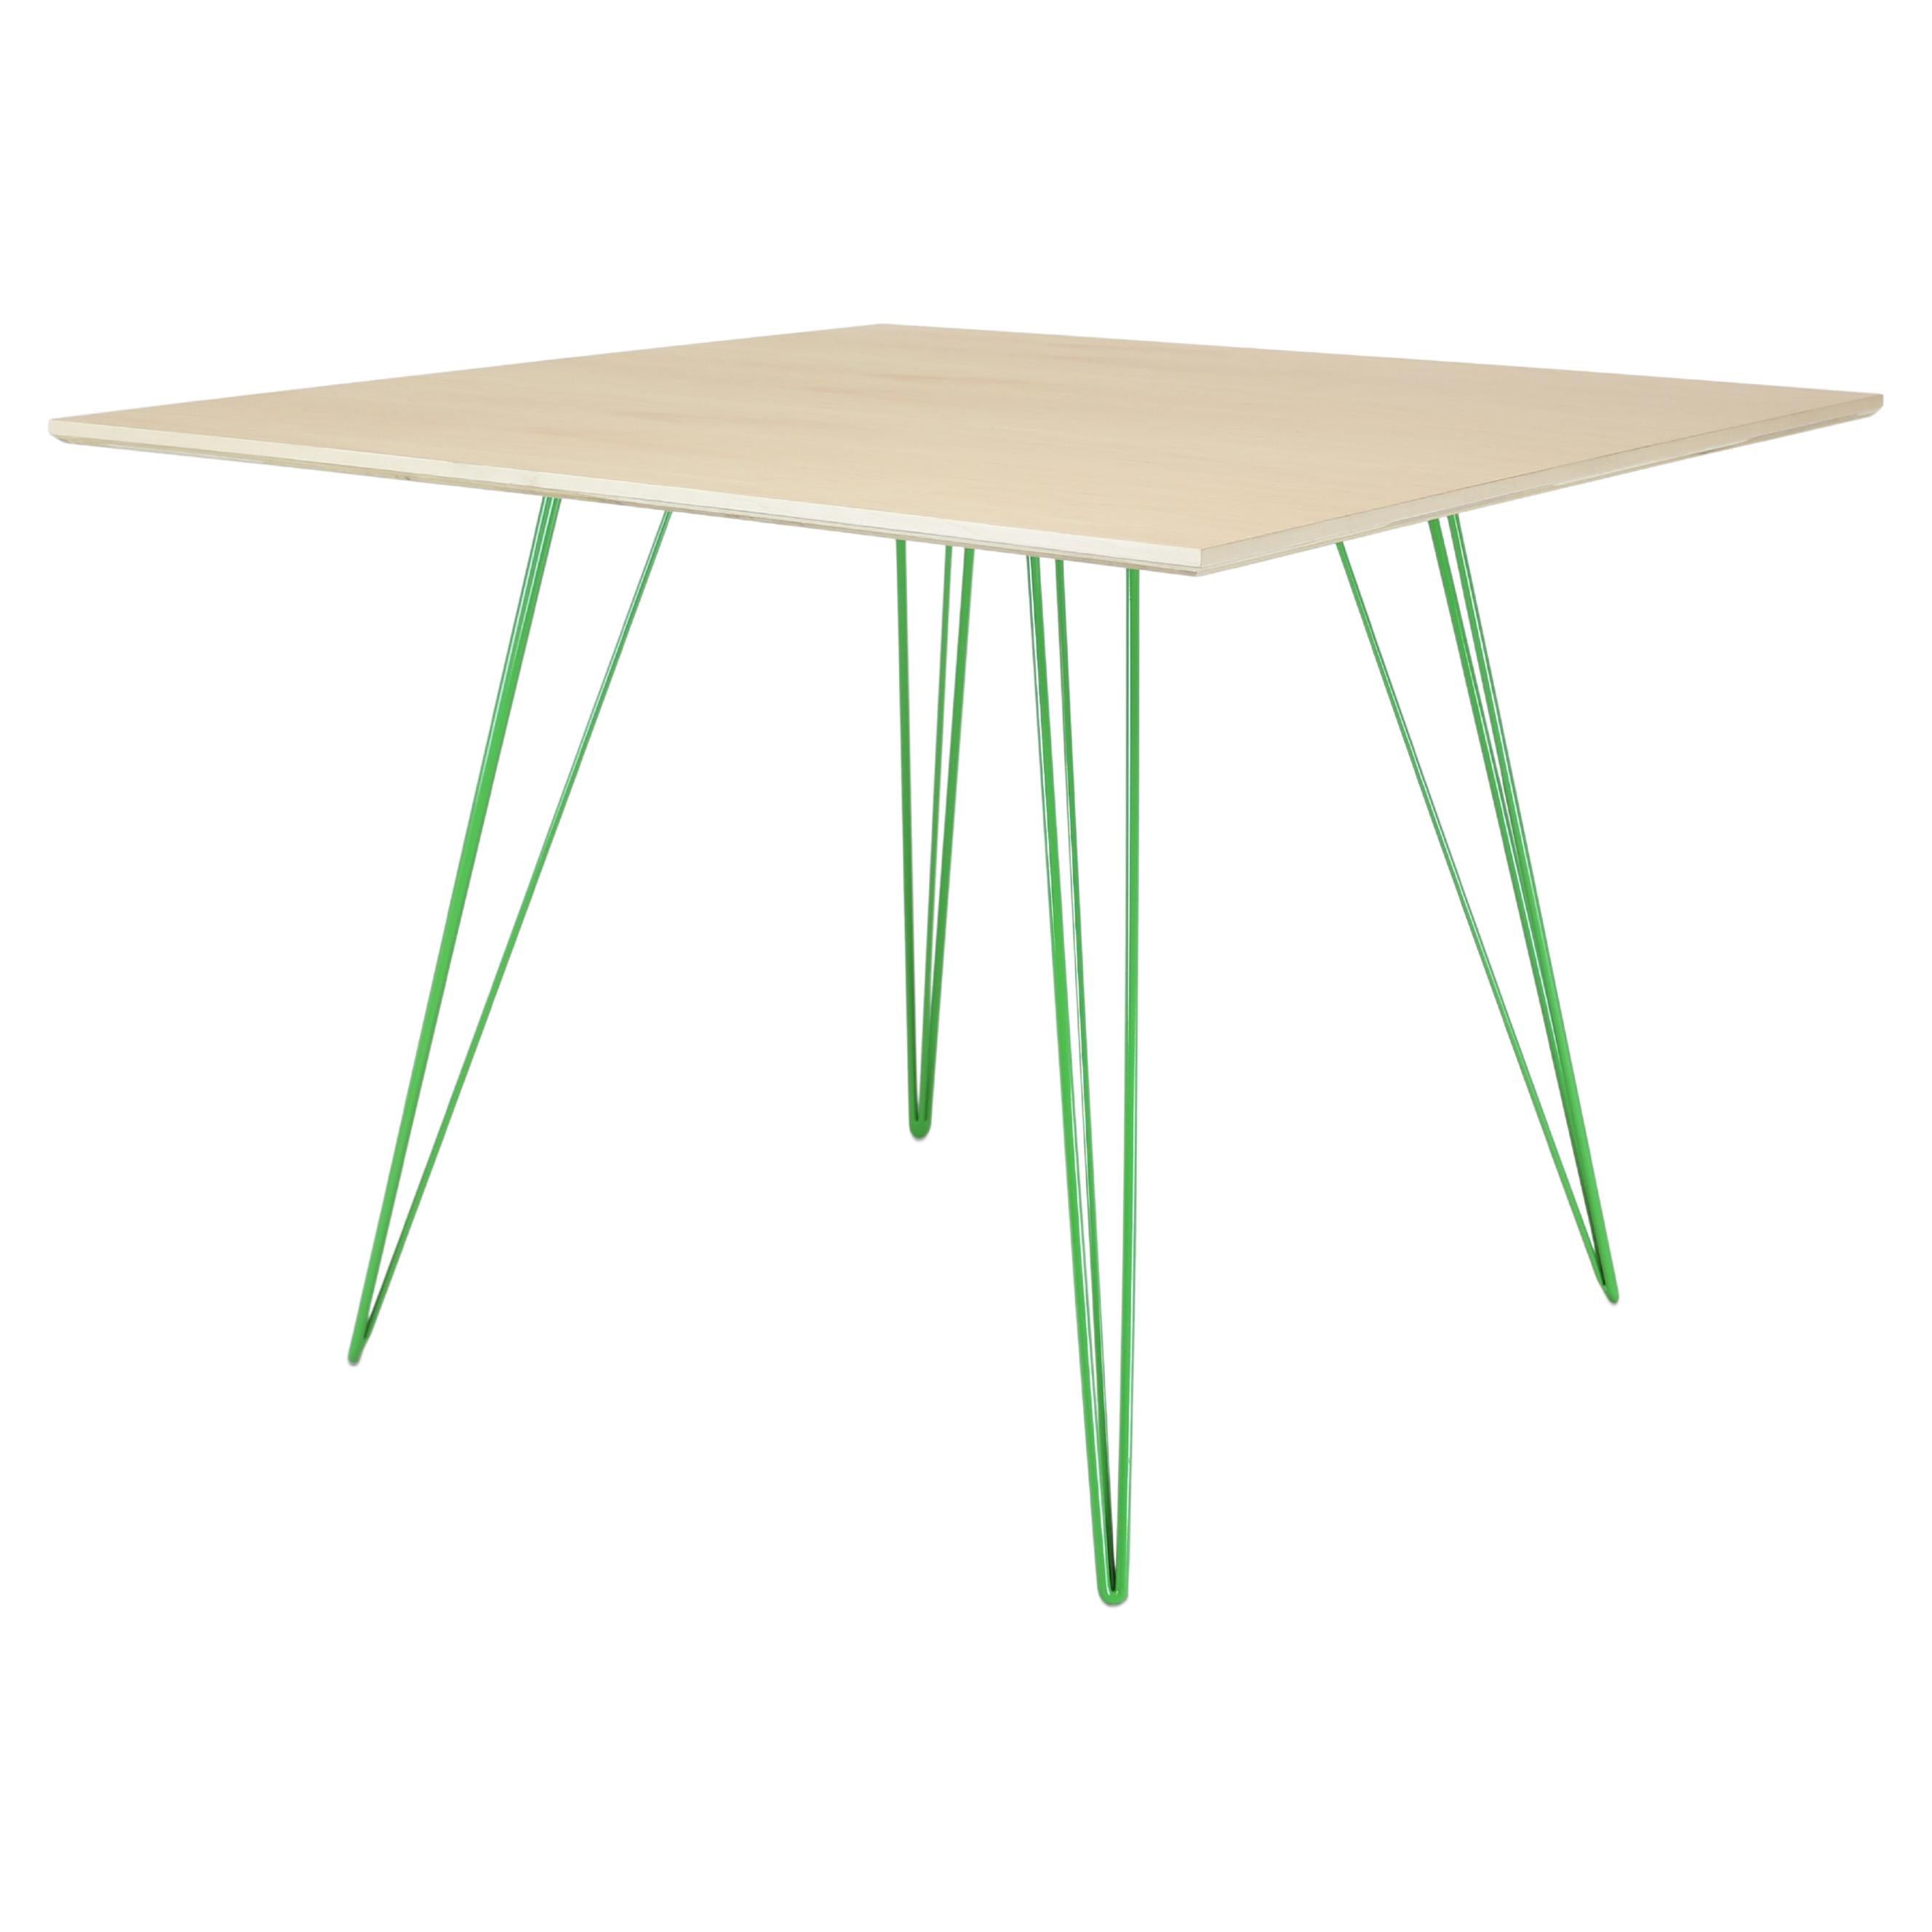 Maple Williams Dining Table Green Hairpin Legs, Square Top